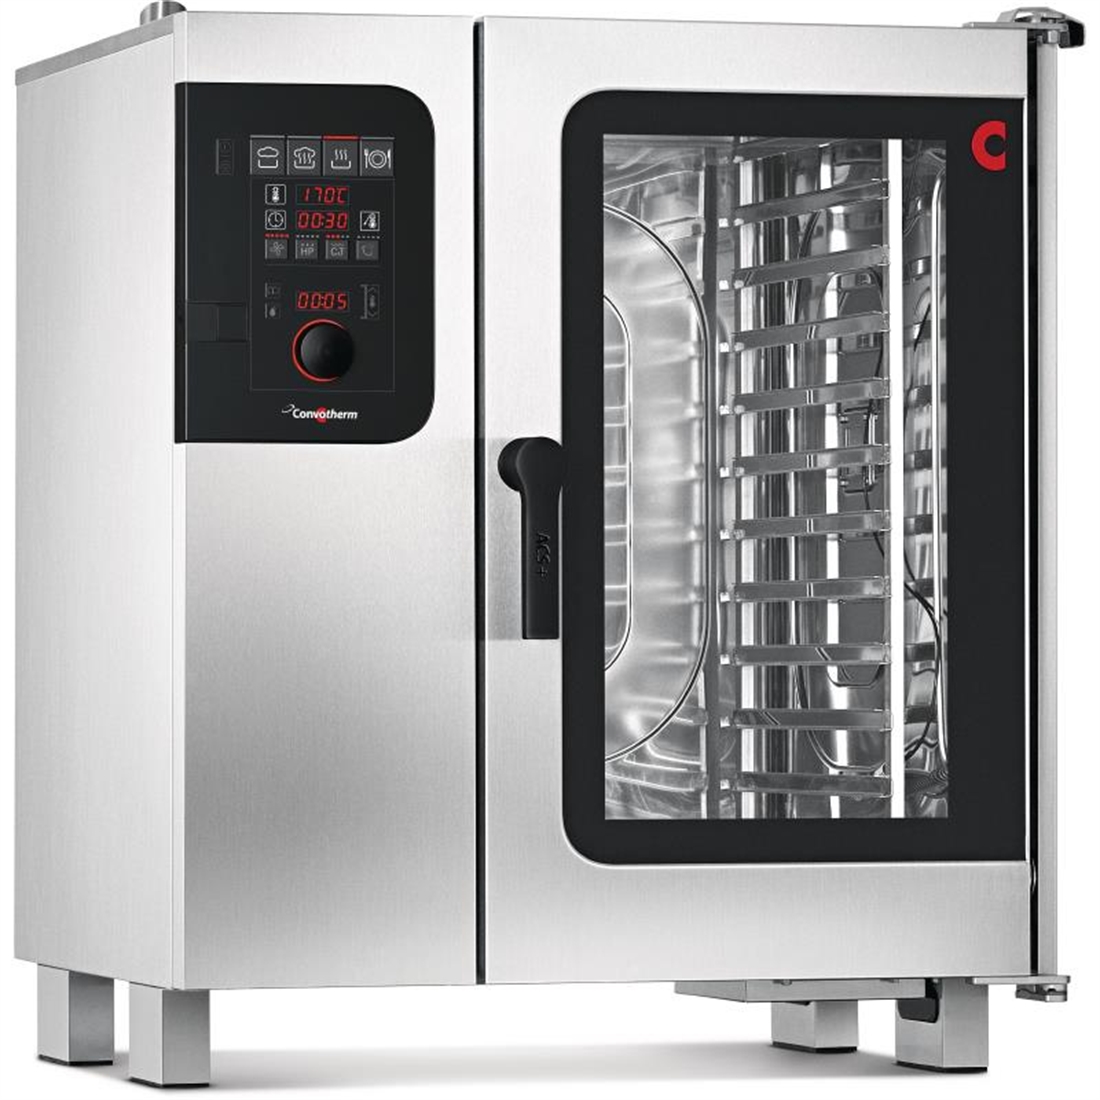 Convotherm 4 easyDial Combi Oven 10 x 1 x1 GN Grid and Install